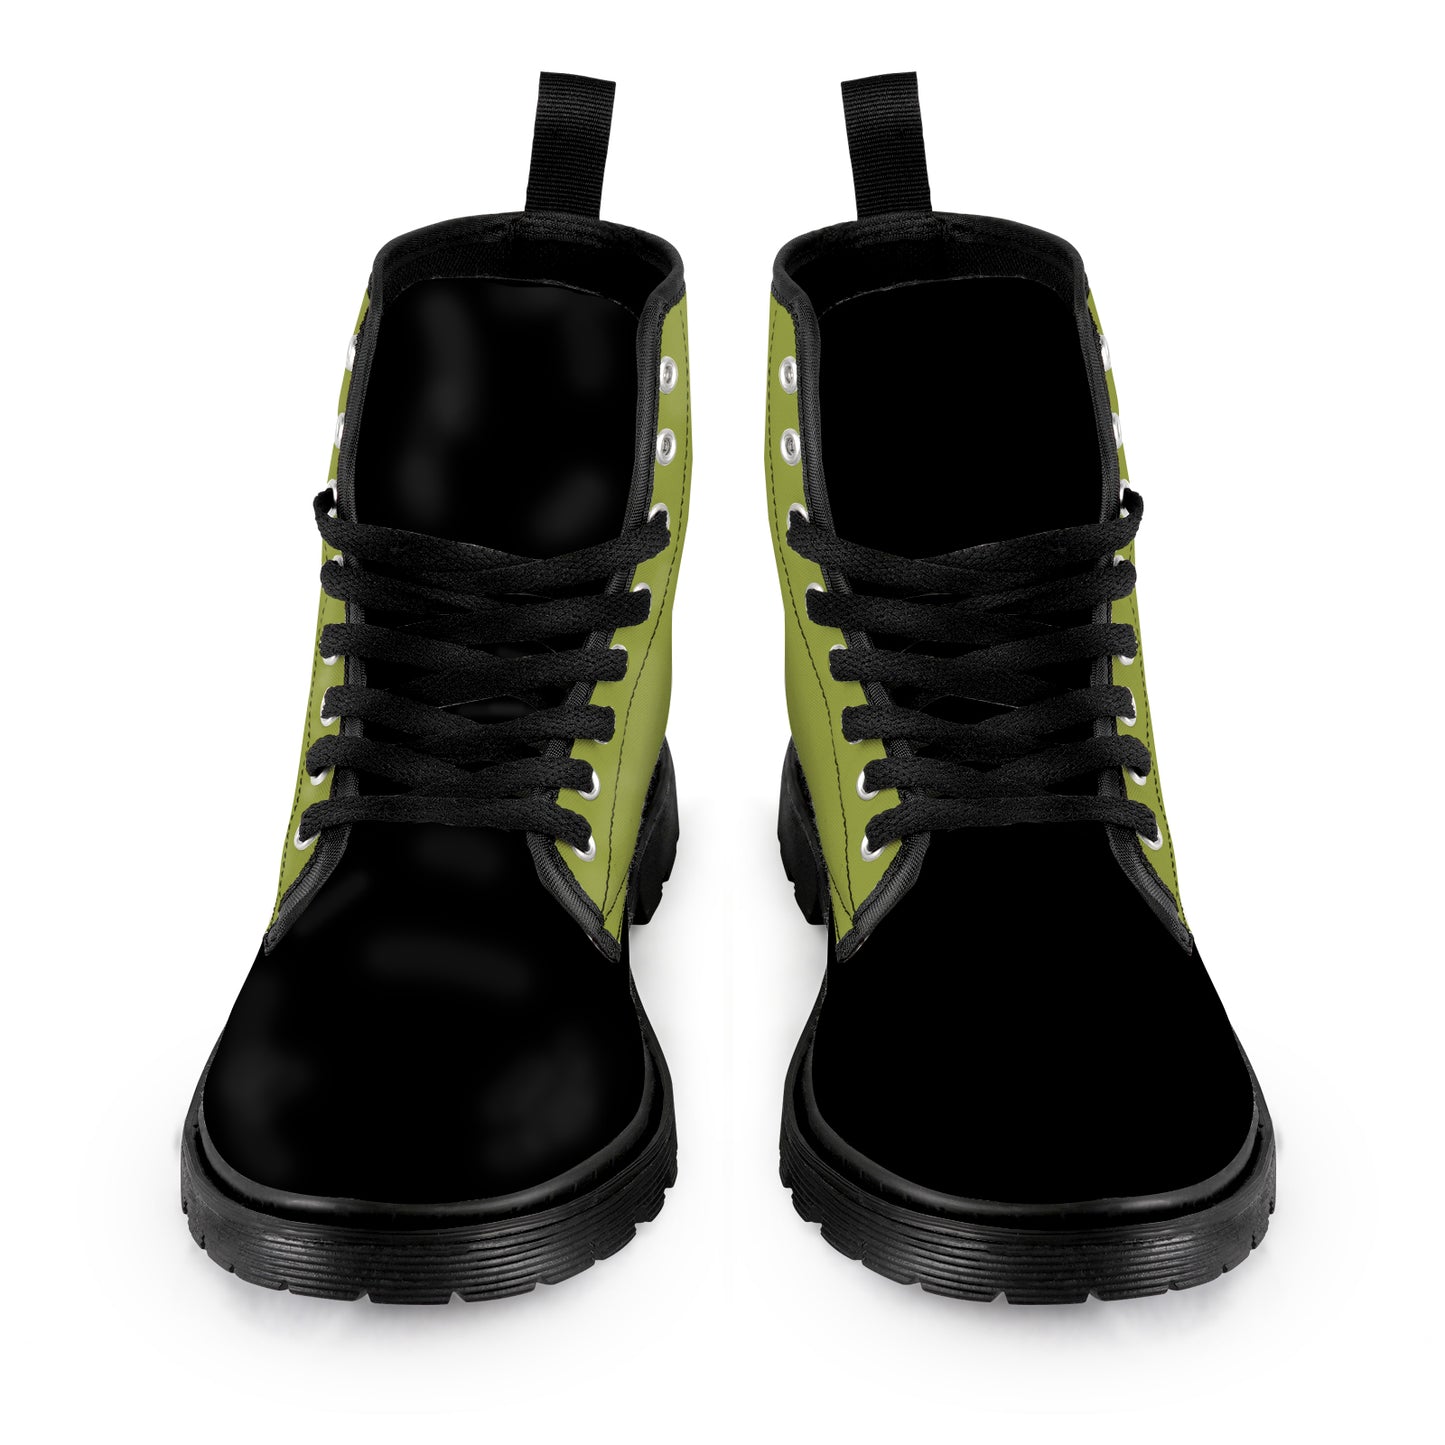 Men's Lace Up Canvas Boots - Green/Black Combo